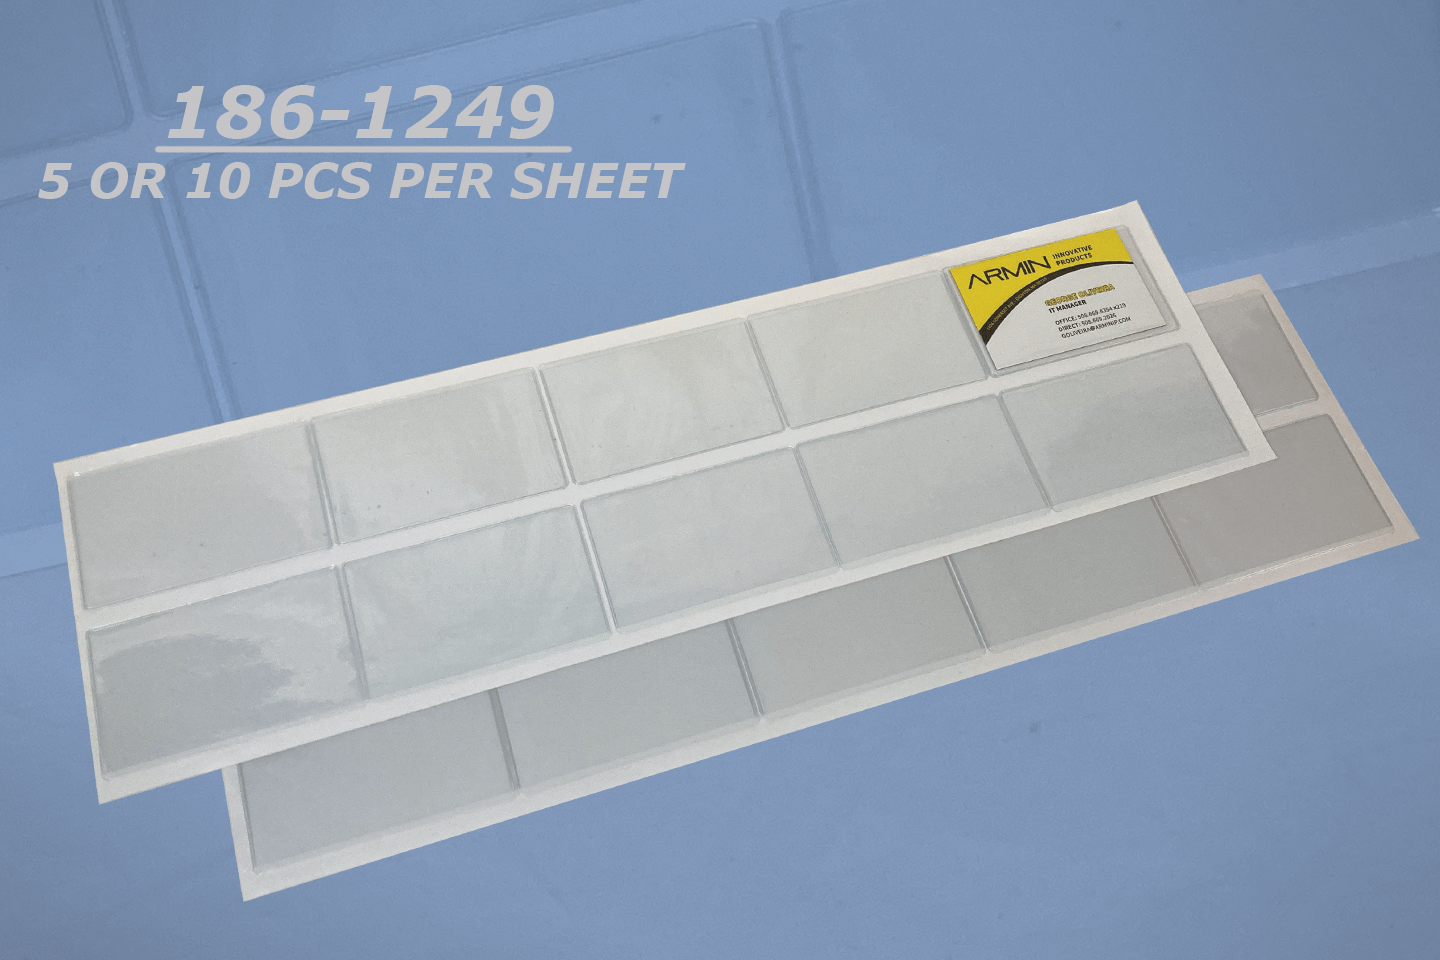 3 3/4" x 2 3/8" Adhesive Pouch - OPEN LONG